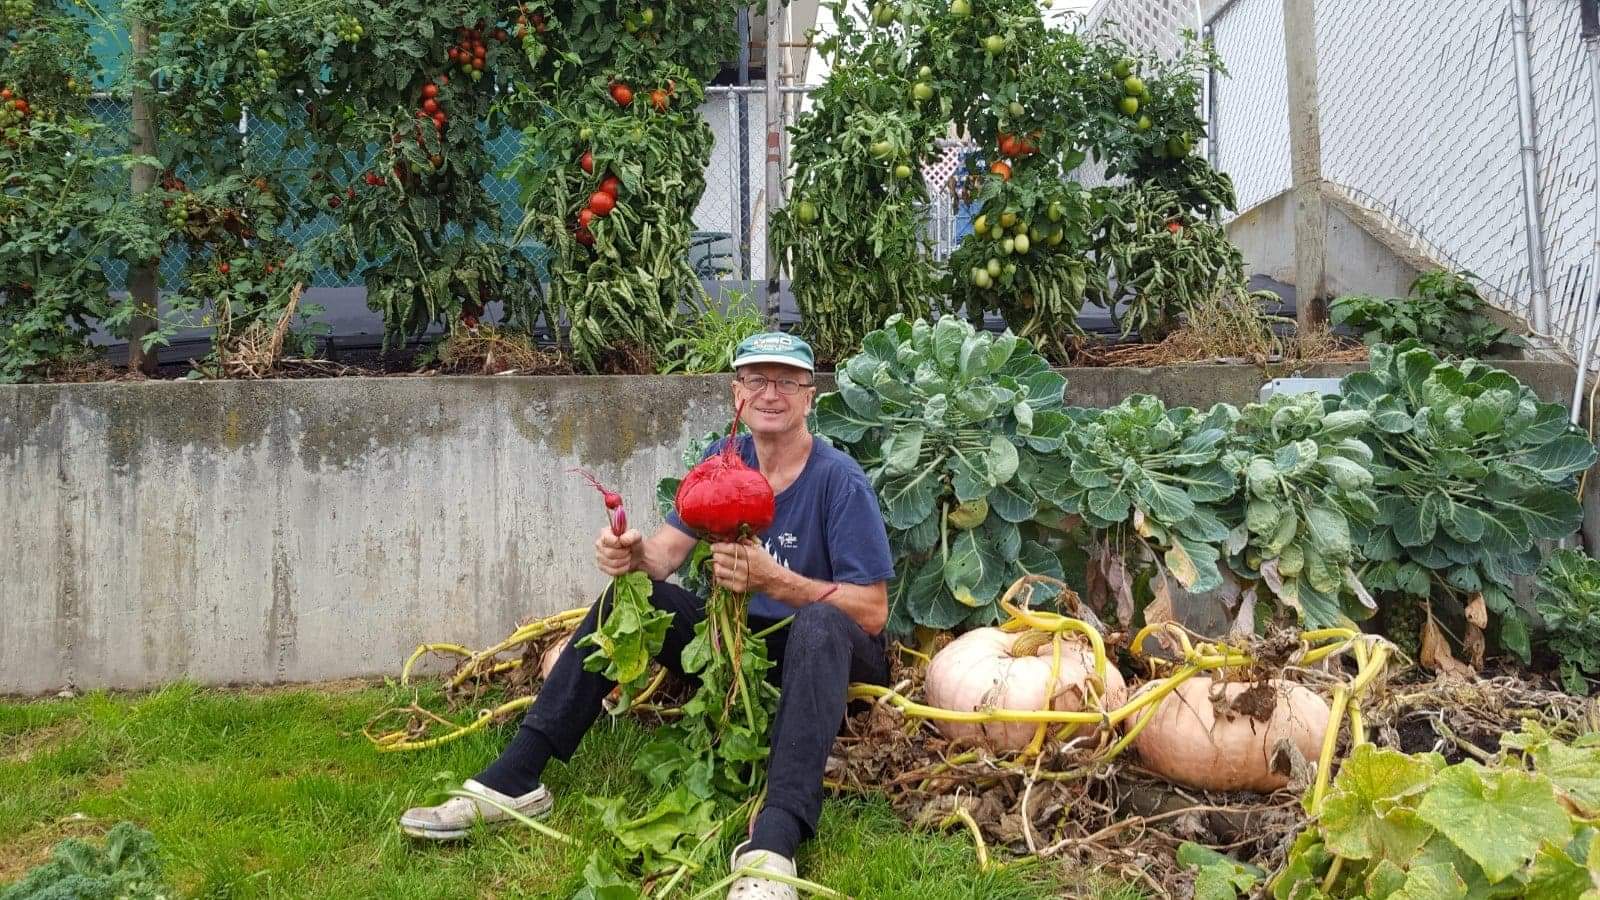 Man sitting in garden holding a small beet and a huge beet, with pumpkins next to him.